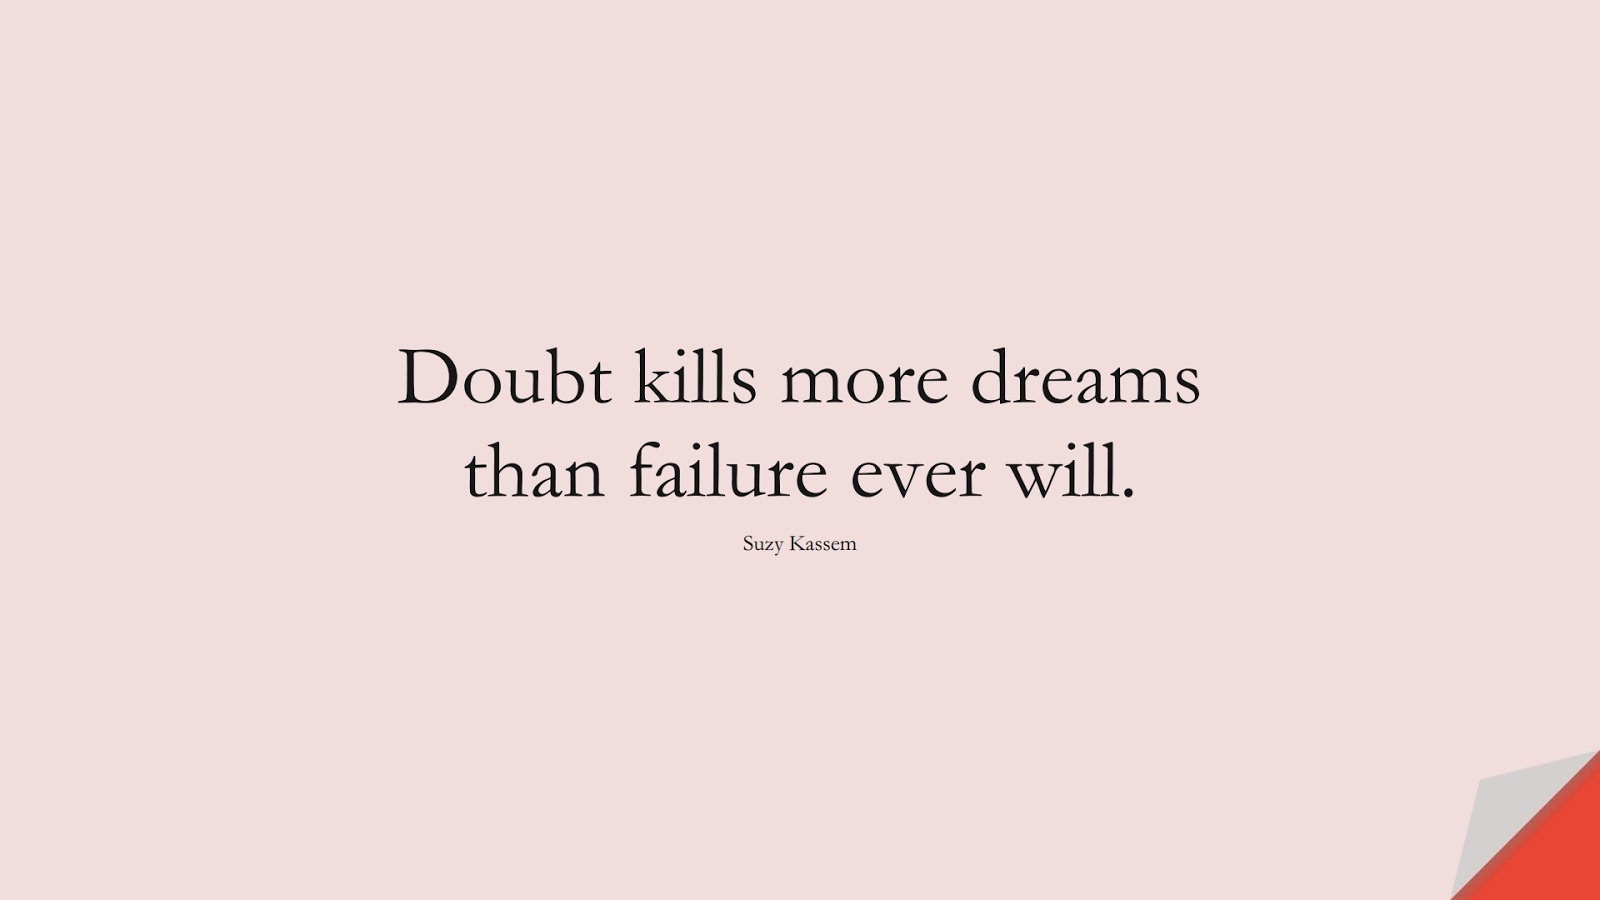 Doubt kills more dreams than failure ever will. (Suzy Kassem);  #FearQuotes